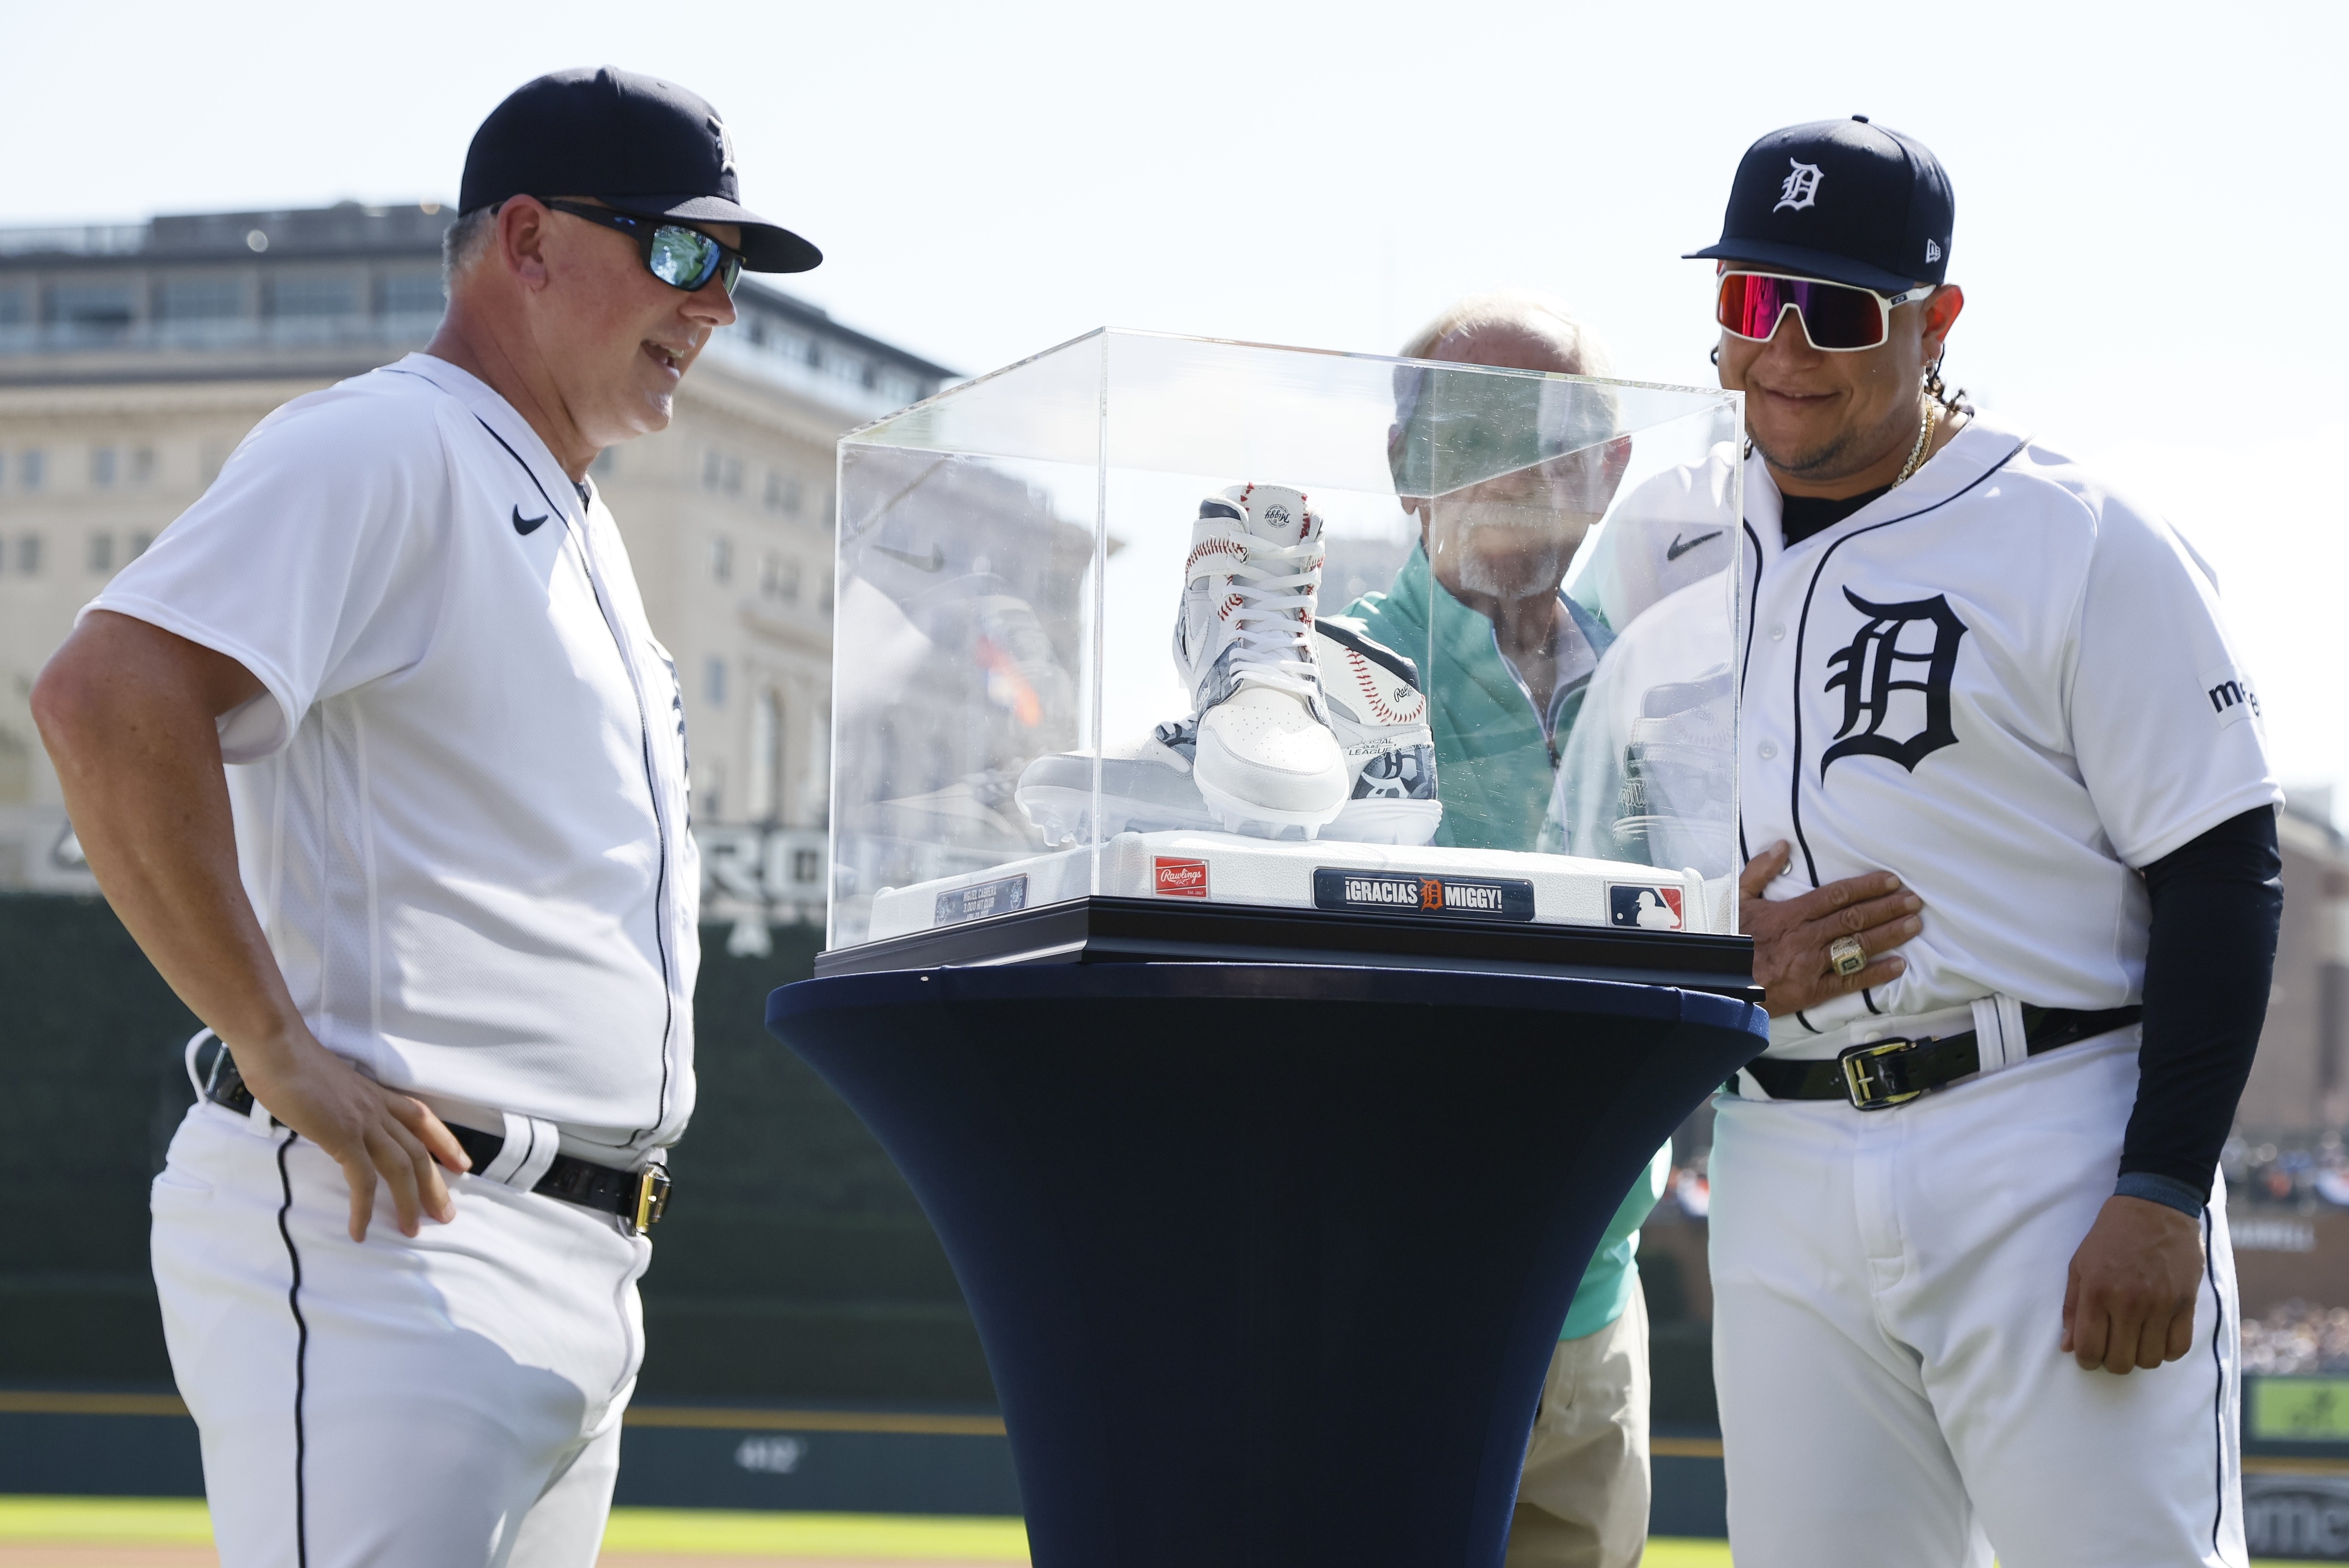 Tigers' uniforms for Players' Weekend unveiled - Bless You Boys